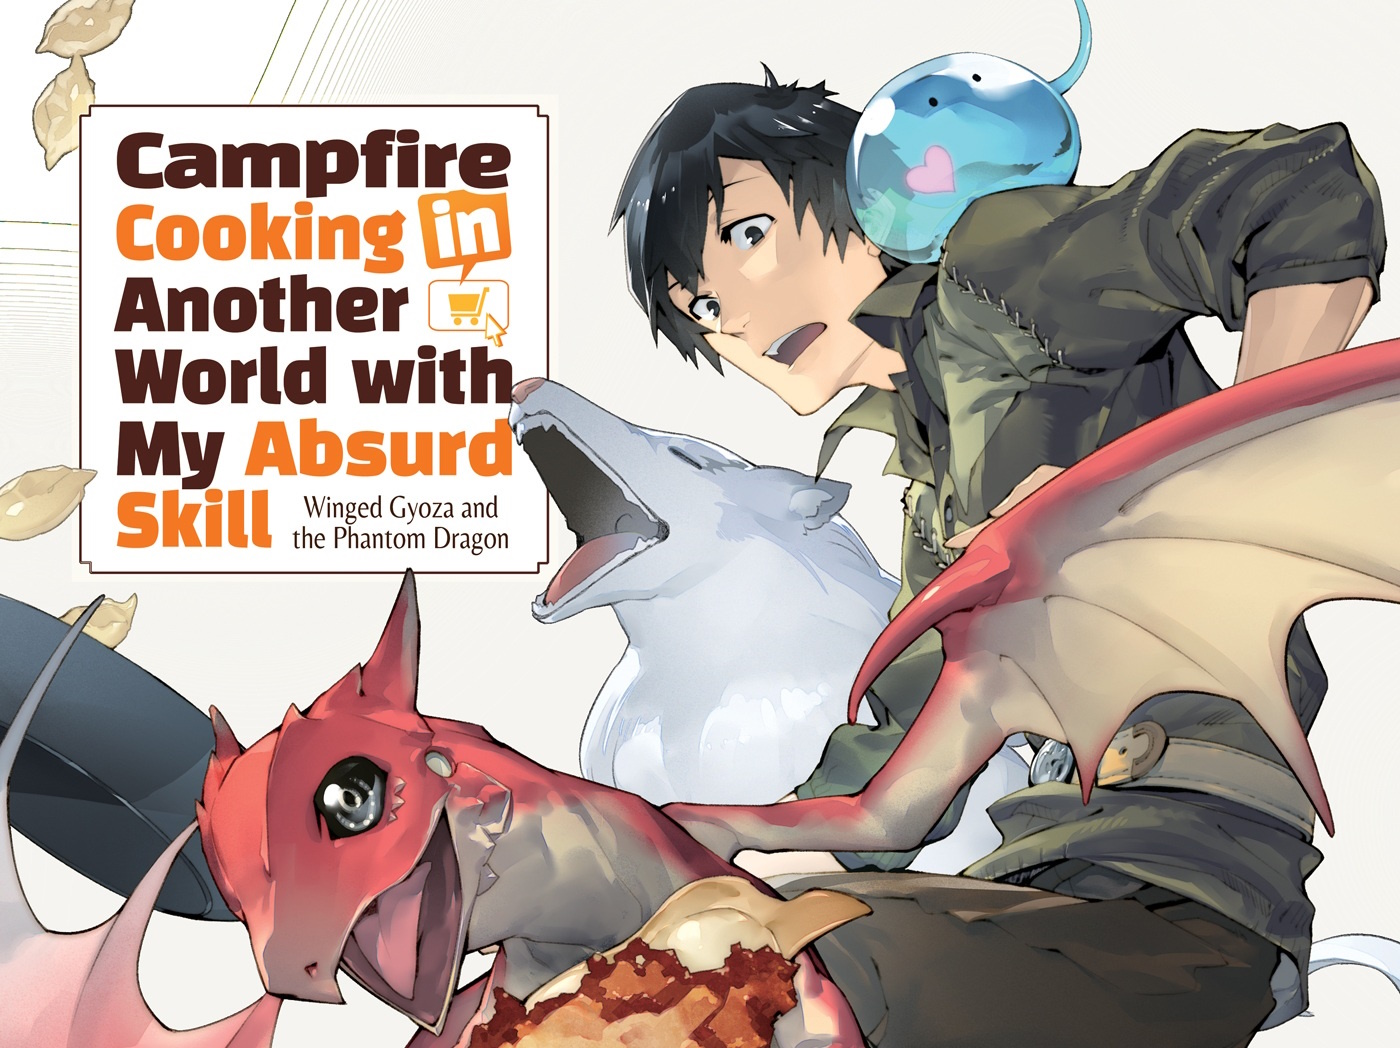 Campfire Cooking in Another World with My Absurd Skill – Episode 1